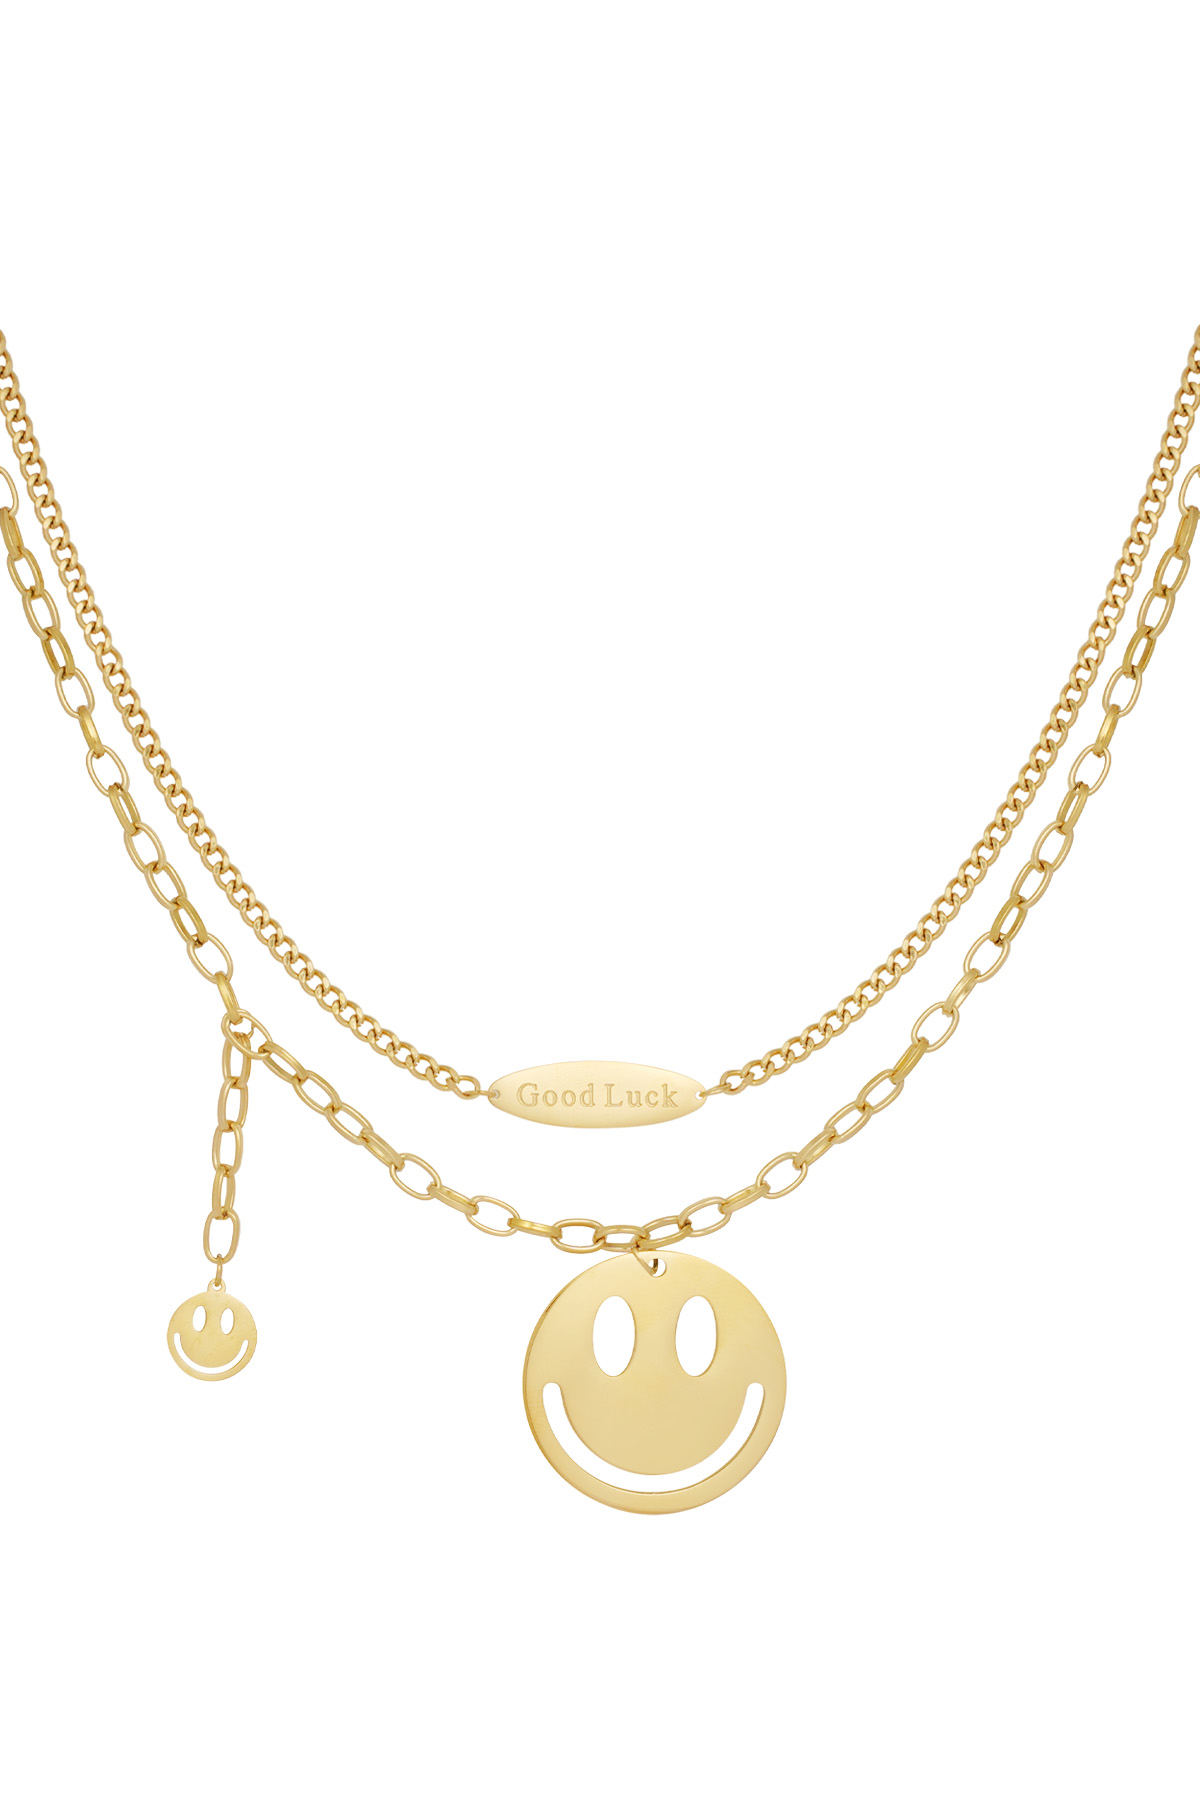 Happy life necklace - gold 